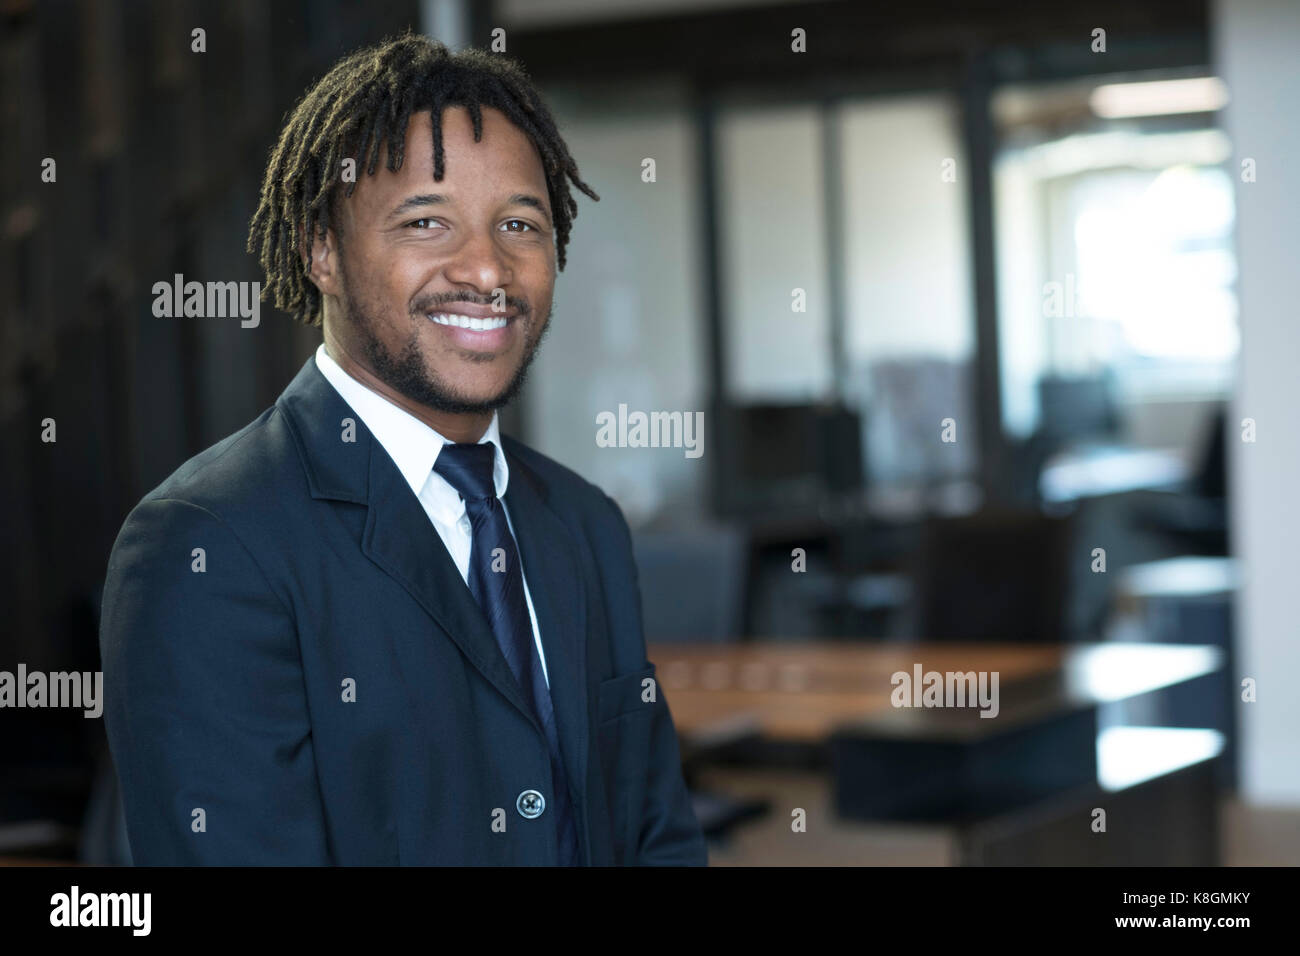 Portrait of young businessman in office, smiling Stock Photo